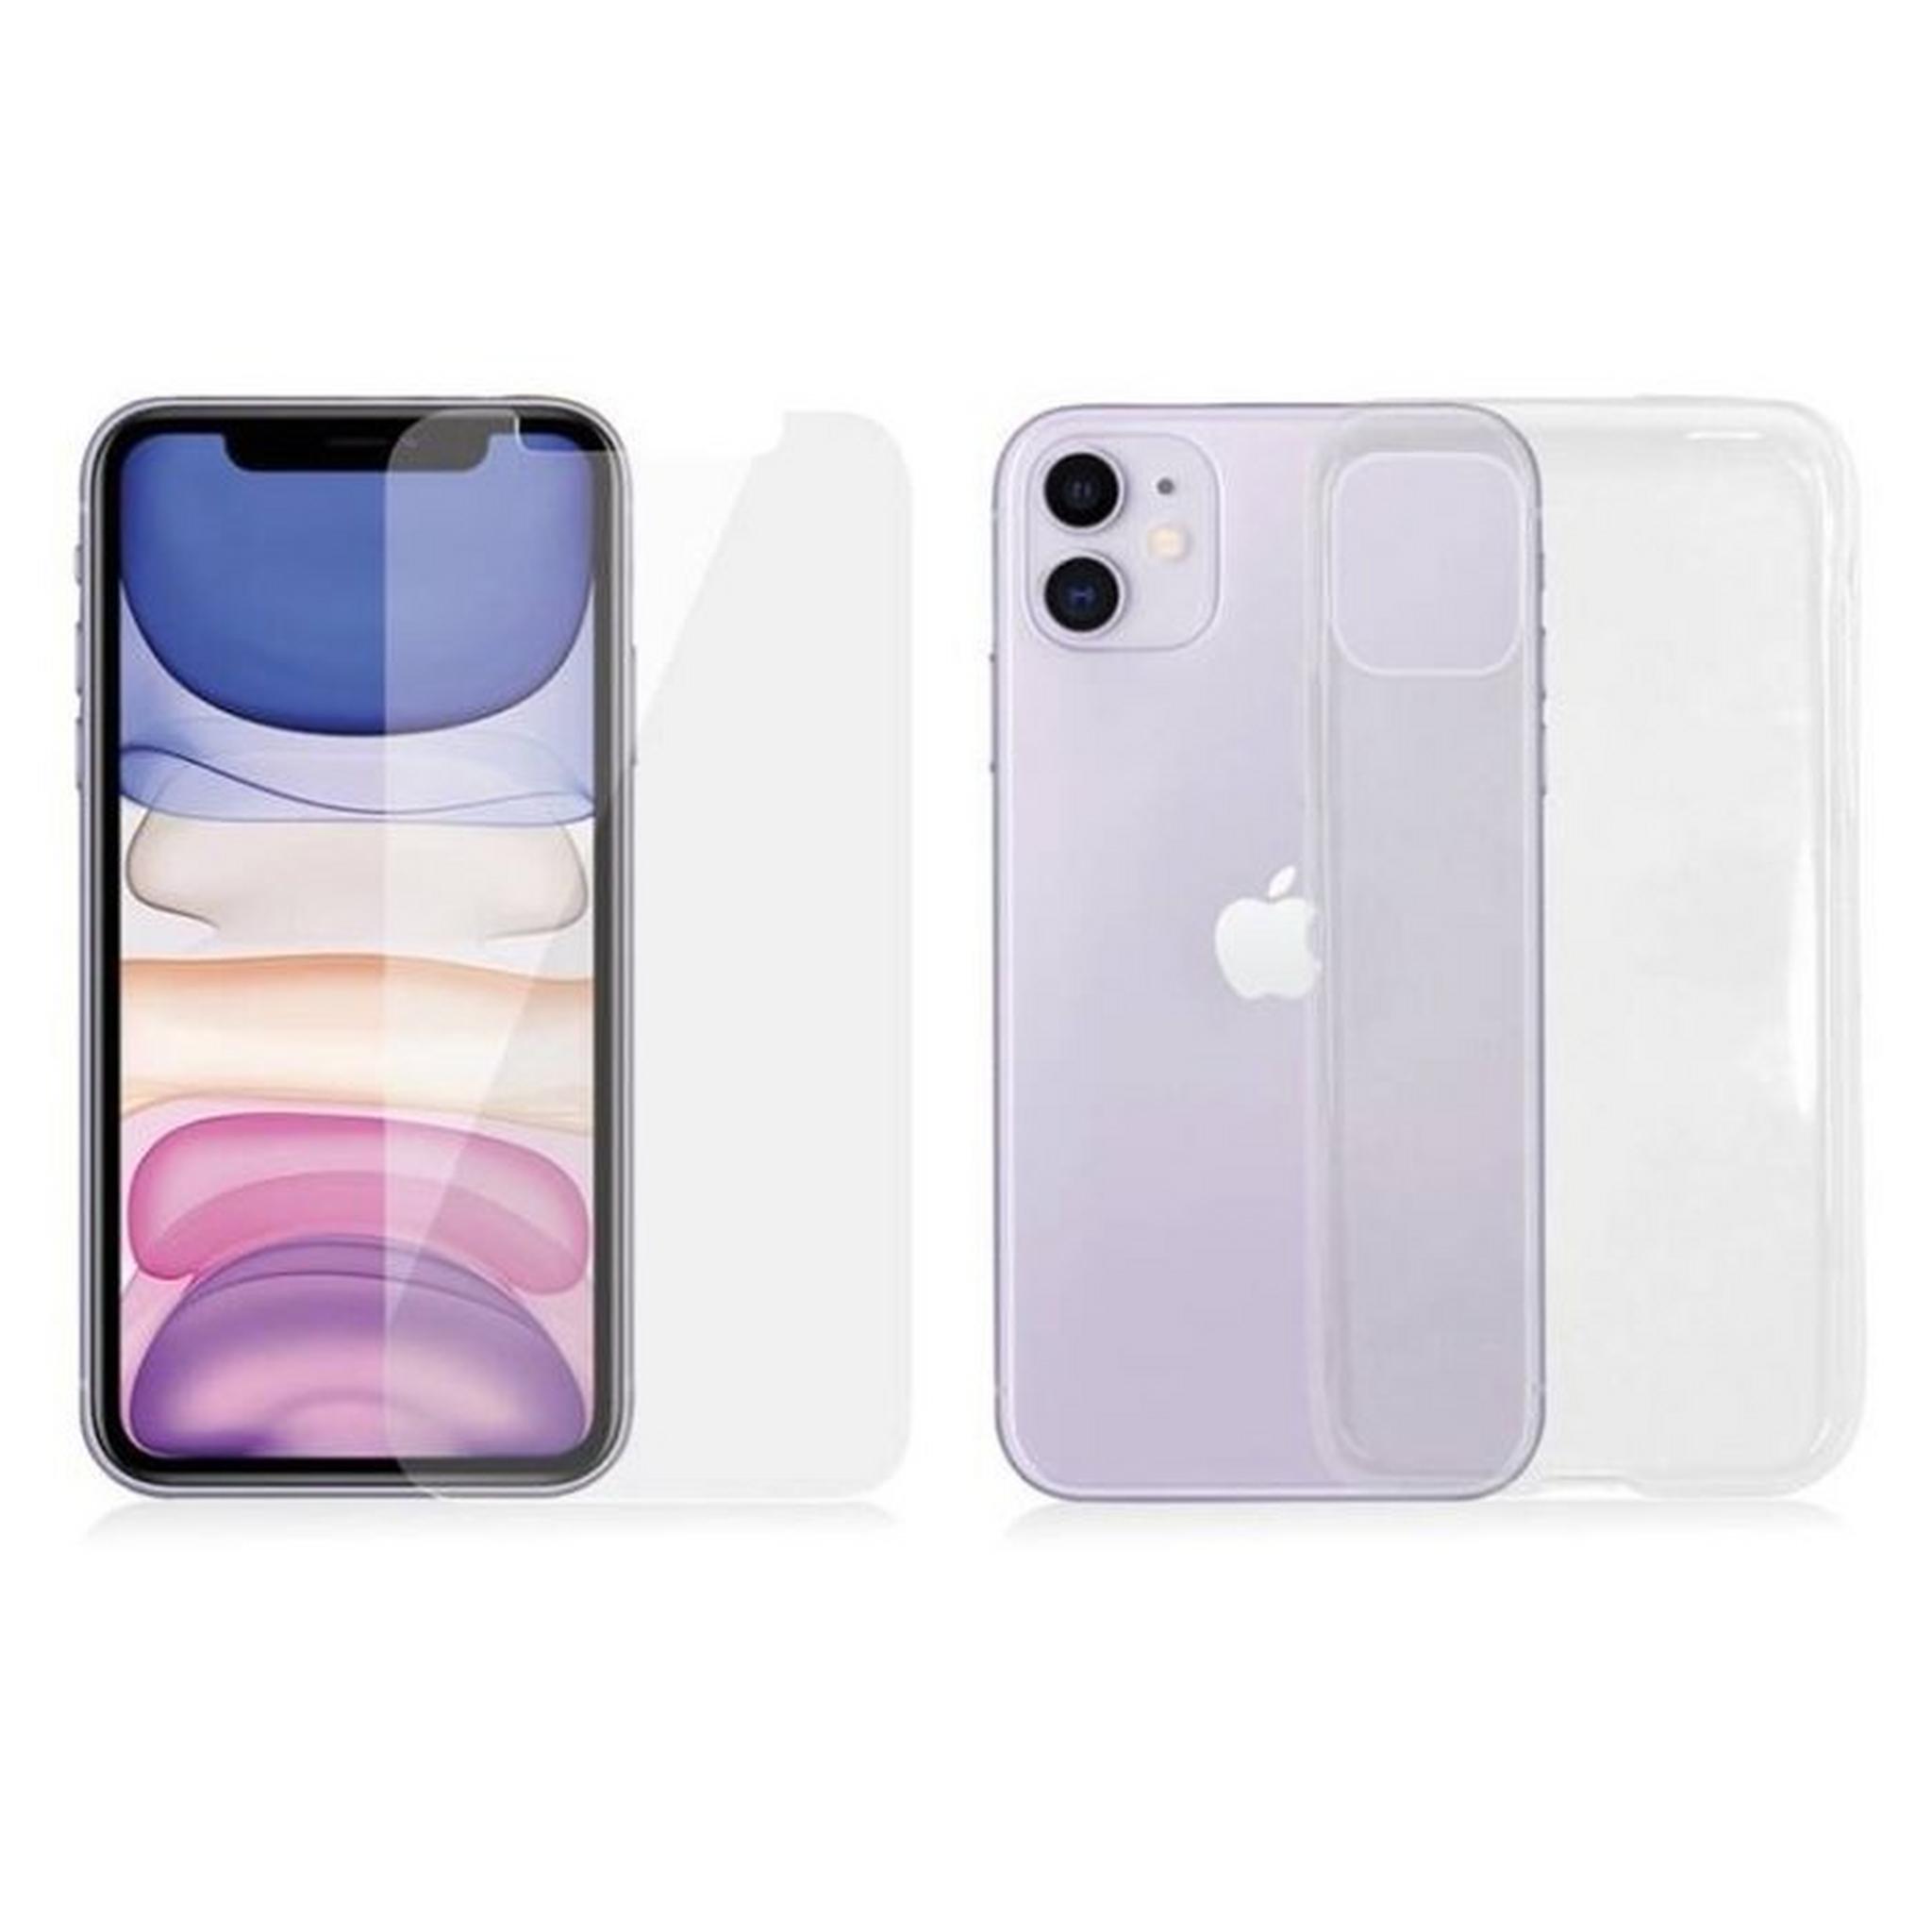 PanzerGlass Dual-360 Screen Protector & Soft Case for iPhone 11